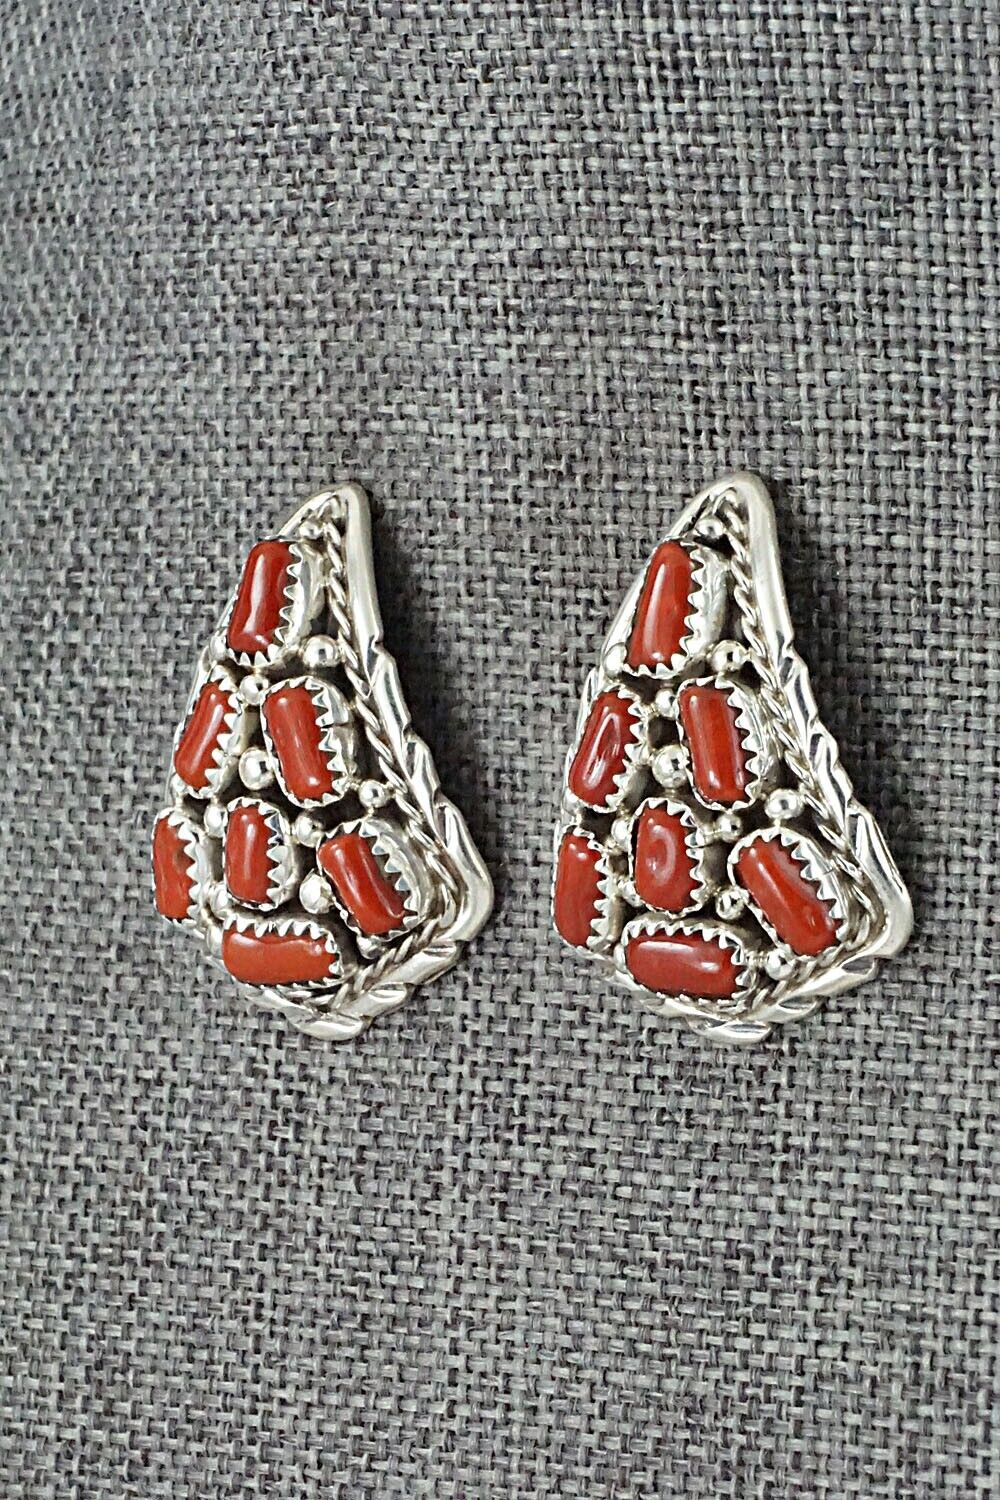 Coral & Sterling Silver Earrings - Melvin Chee